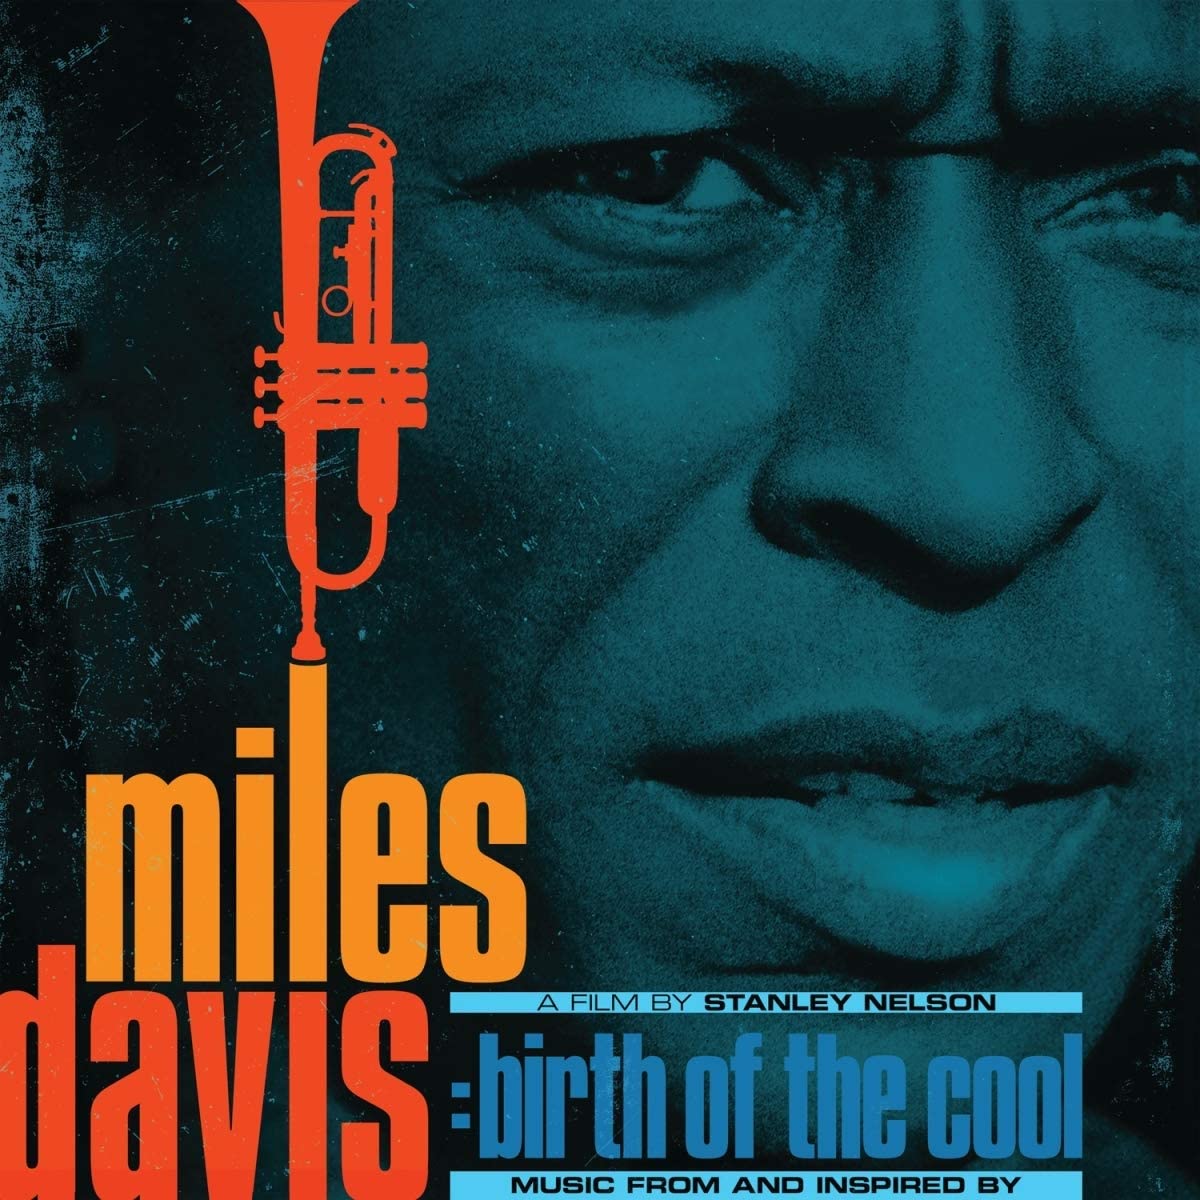 Music From And Inspired By Birth Of The Cool, A Film By Stanley Nelson - Vinyl | Miles Davis